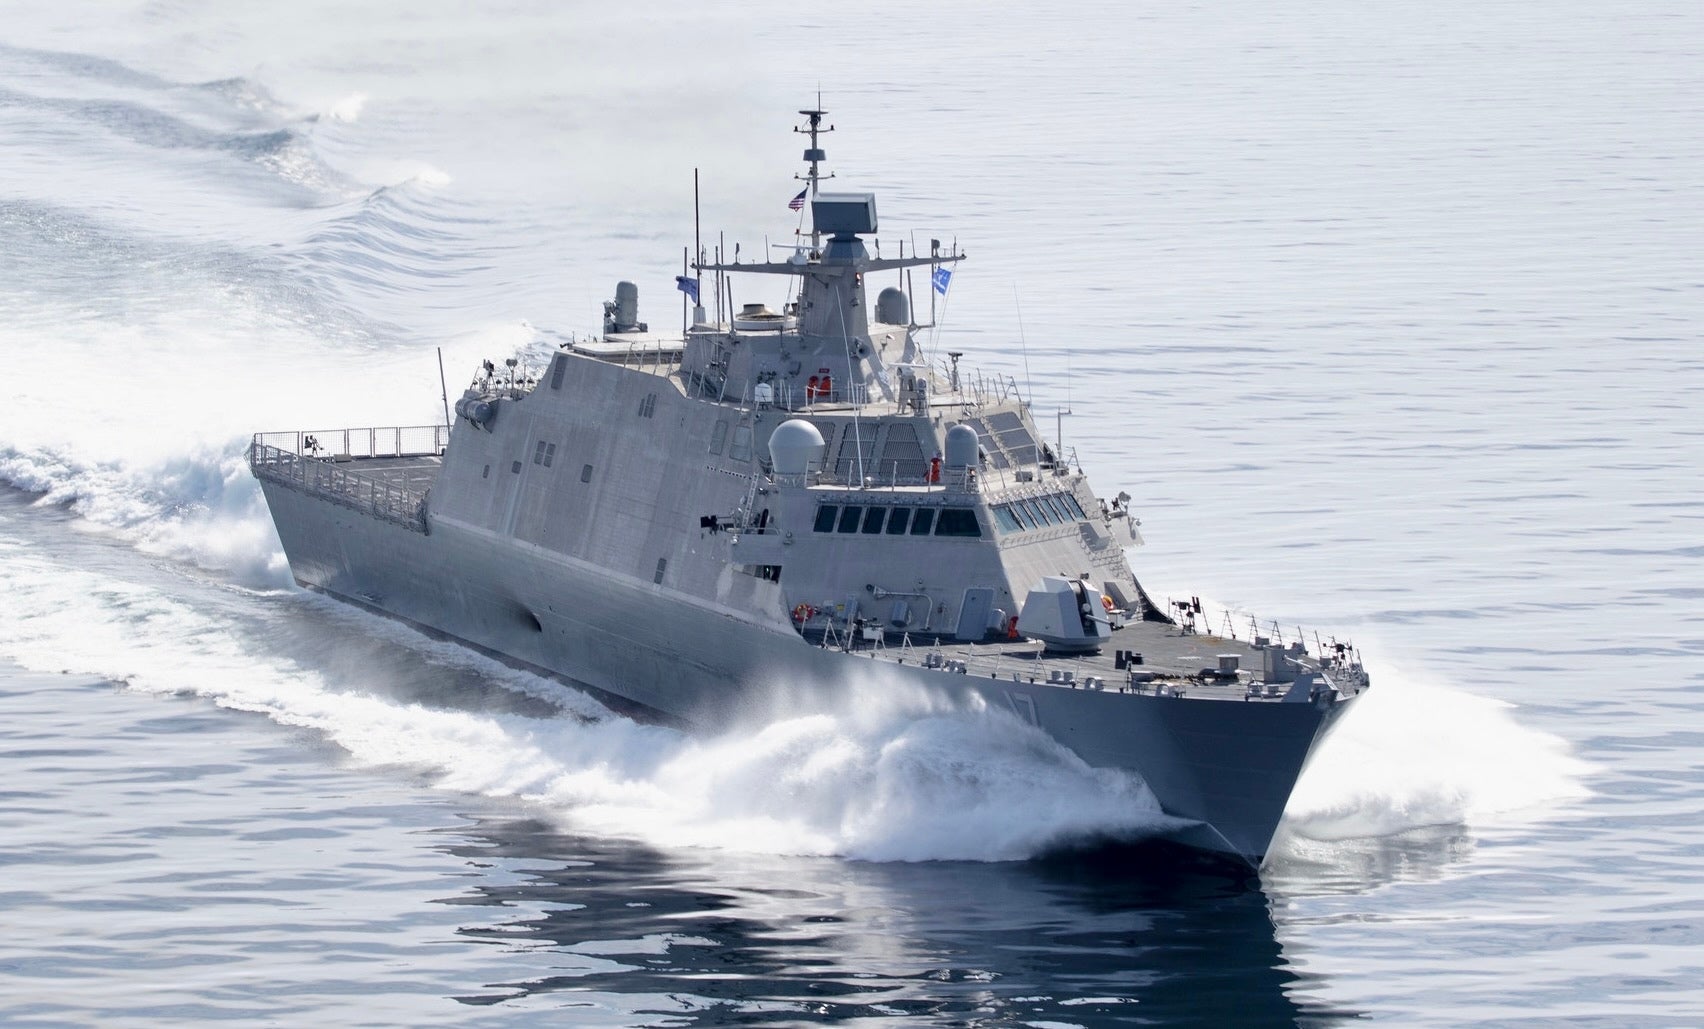 The future USS Indianapolis (LCS 17) during Acceptance Trials in Lake Michigan, June 19, 2019. (Courtesy Lockheed Martin)